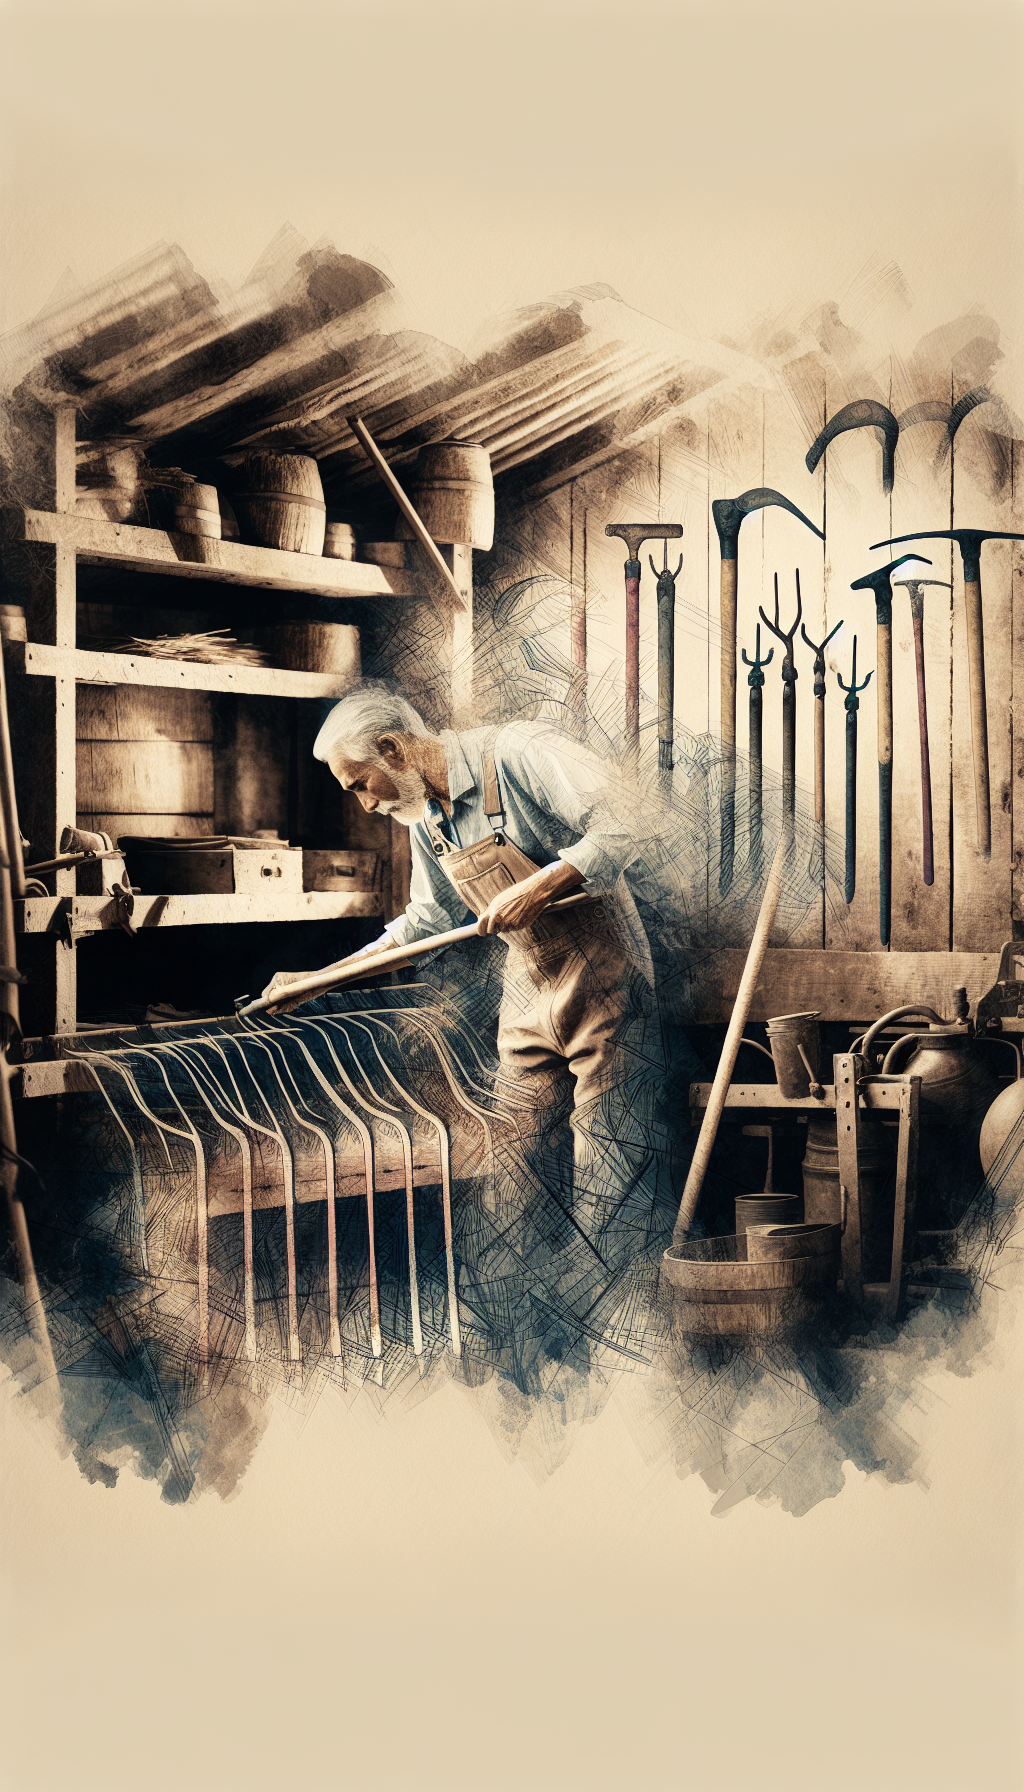 An illustration shows an elderly farmer in overalls tenderly oiling a cross-section of weathered tools—scythes, plows, pitchforks—nestled in a barn’s wooden loft. Each tool has a faint outline of its modern counterpart as a ghostly overlay, hinting at their evolution. Patches of pencil sketch, watercolor, and sepia tones intermingle, symbolizing the blend of historical value and ongoing care.